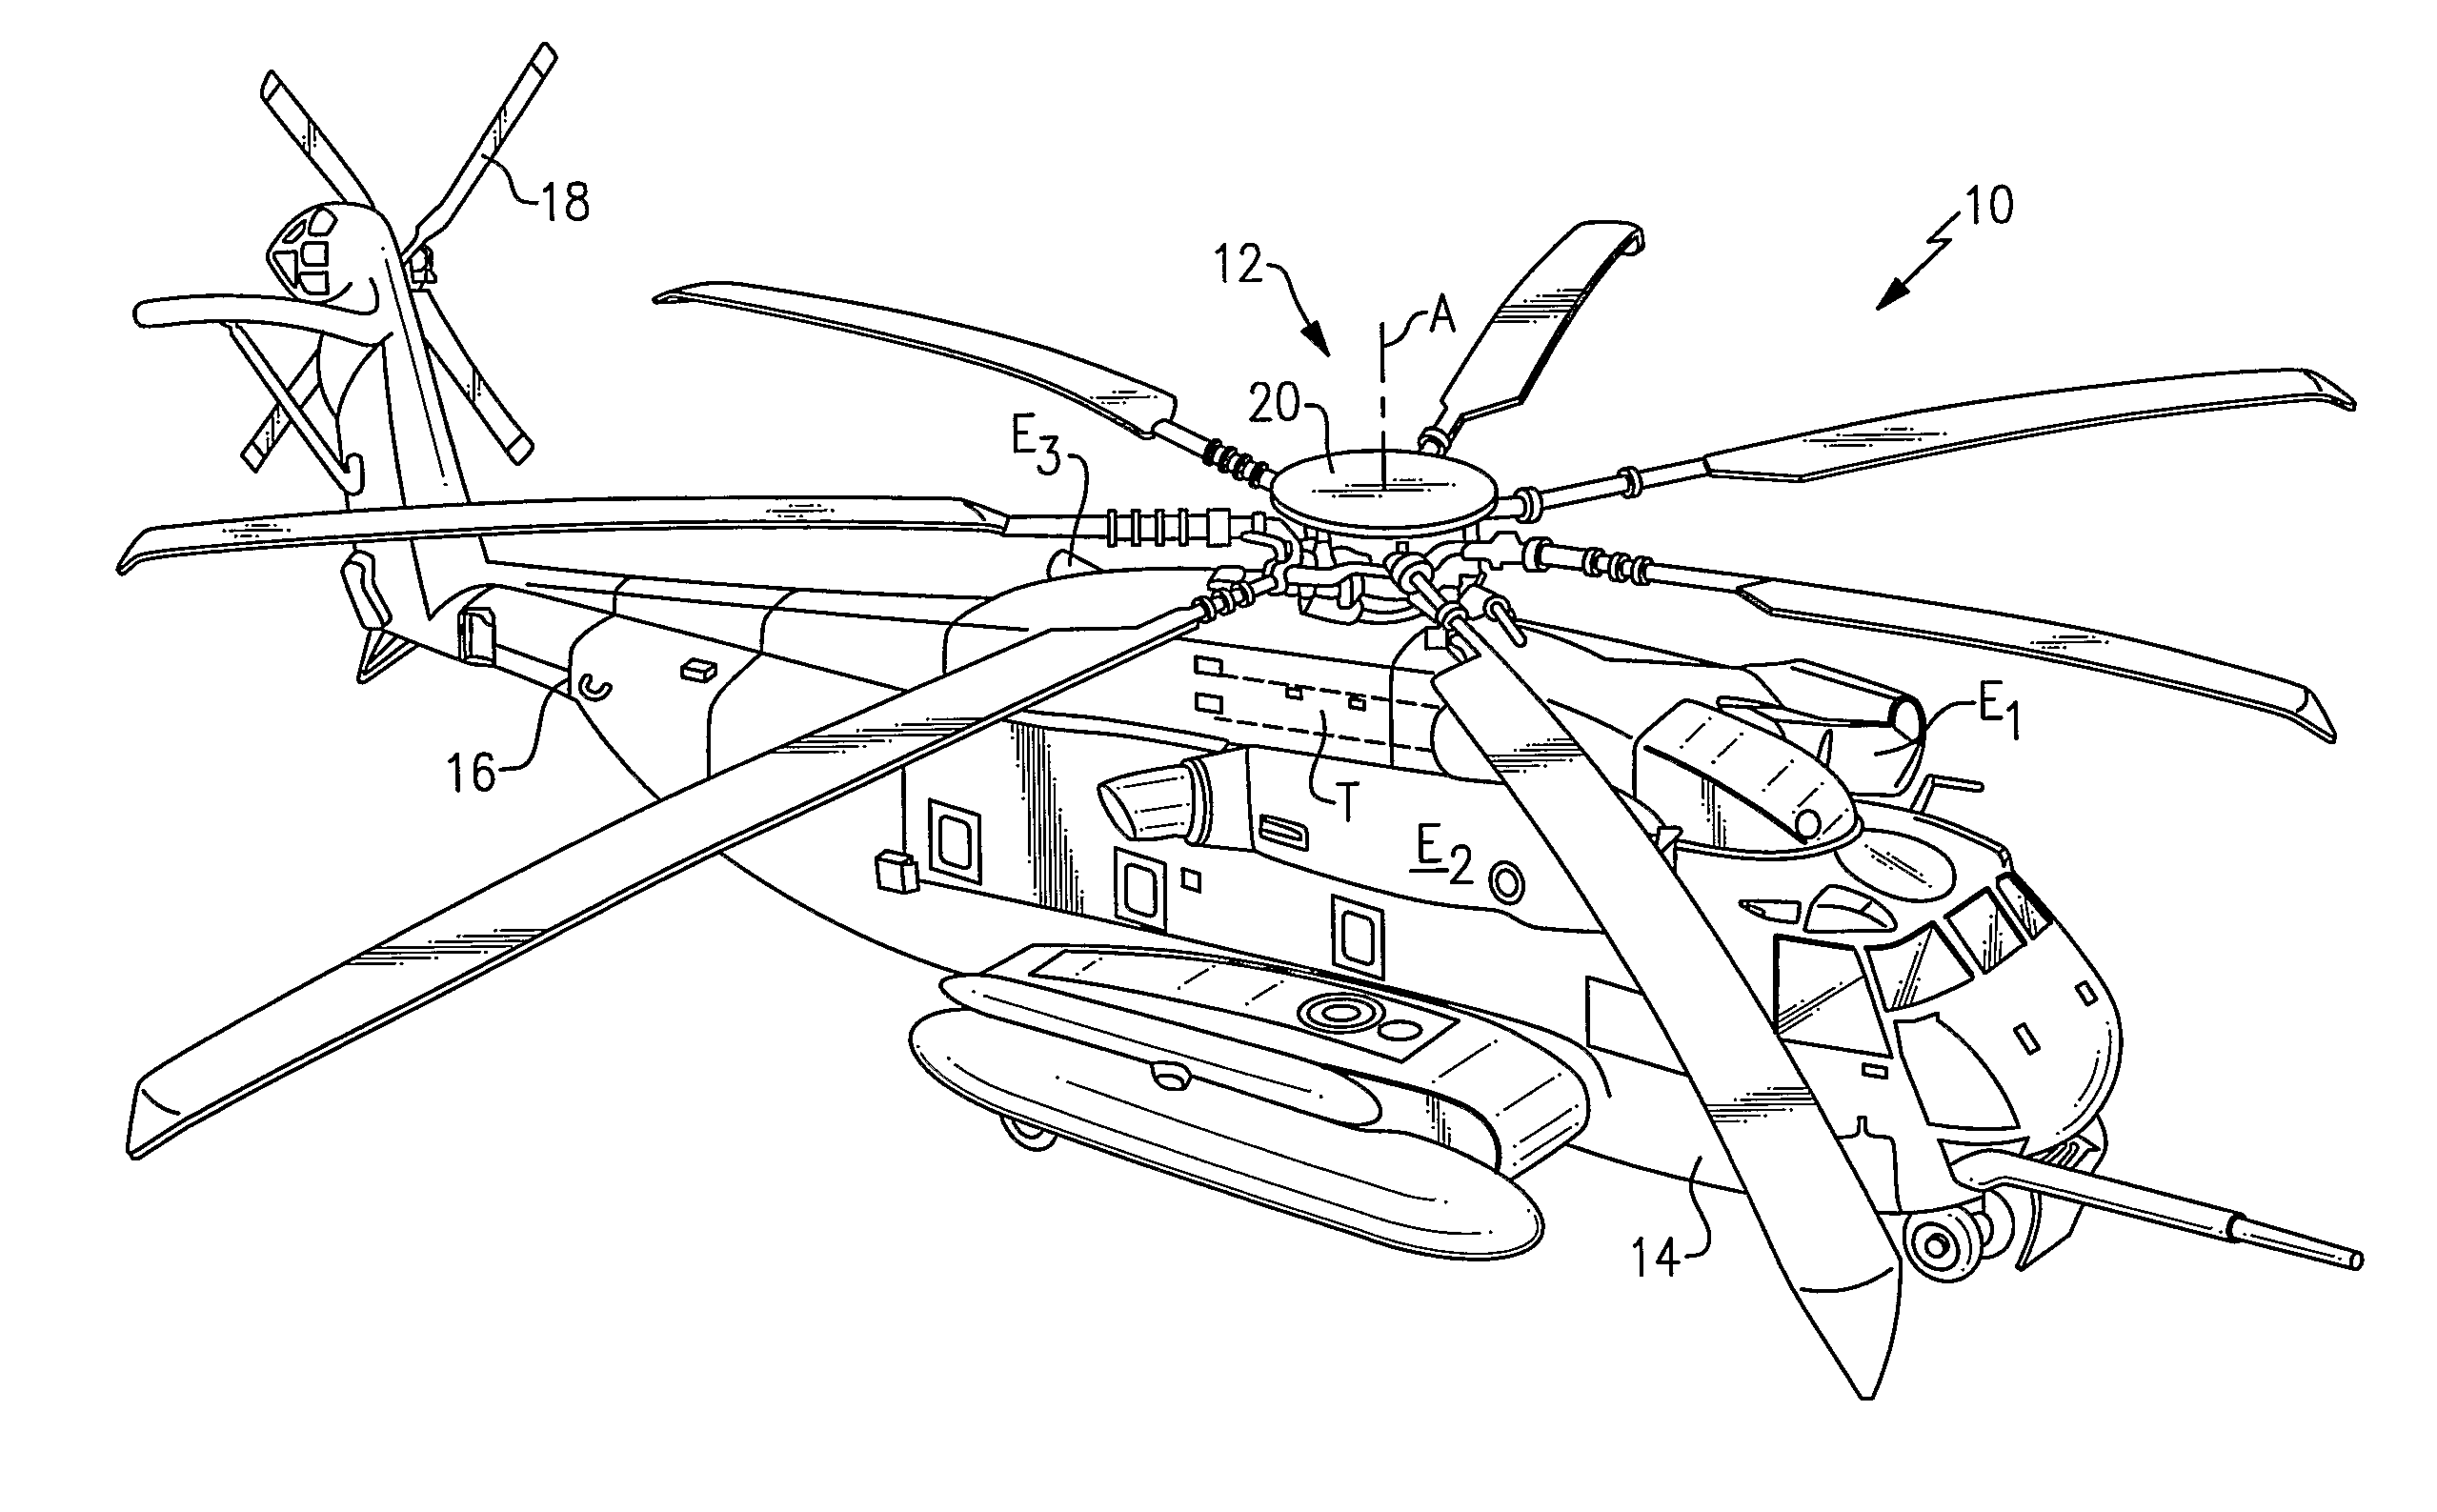 Multi-path rotary wing aircraft gearbox